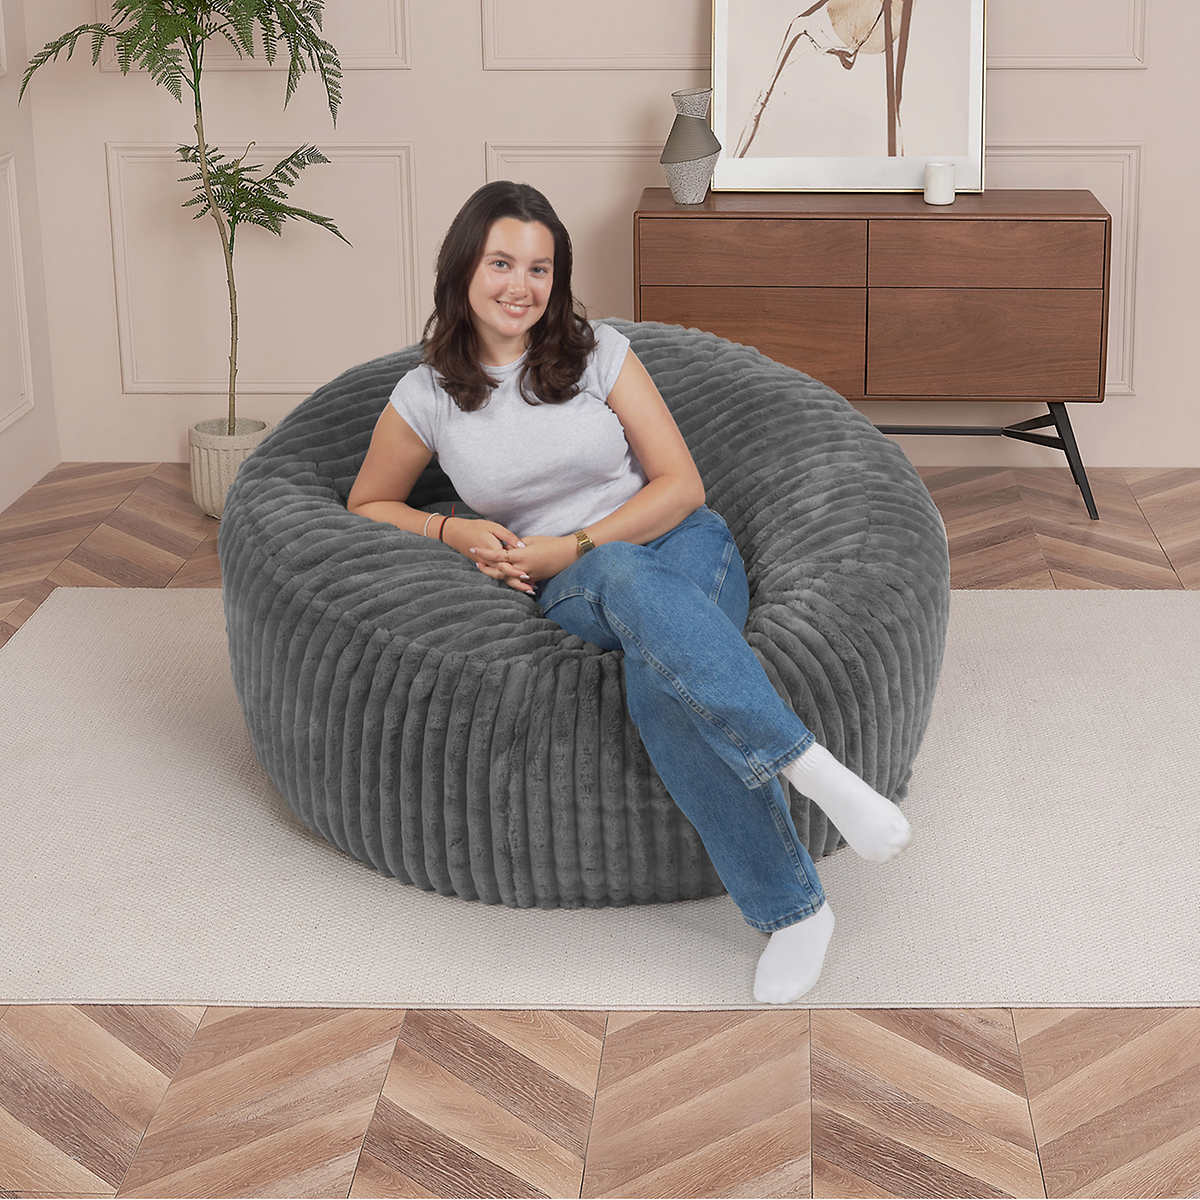 Living Room Furniture Fur Giant Bean Bag Sofa Cover With Filling & Without  Filling- FREE SHIPPING WORLDWIDE